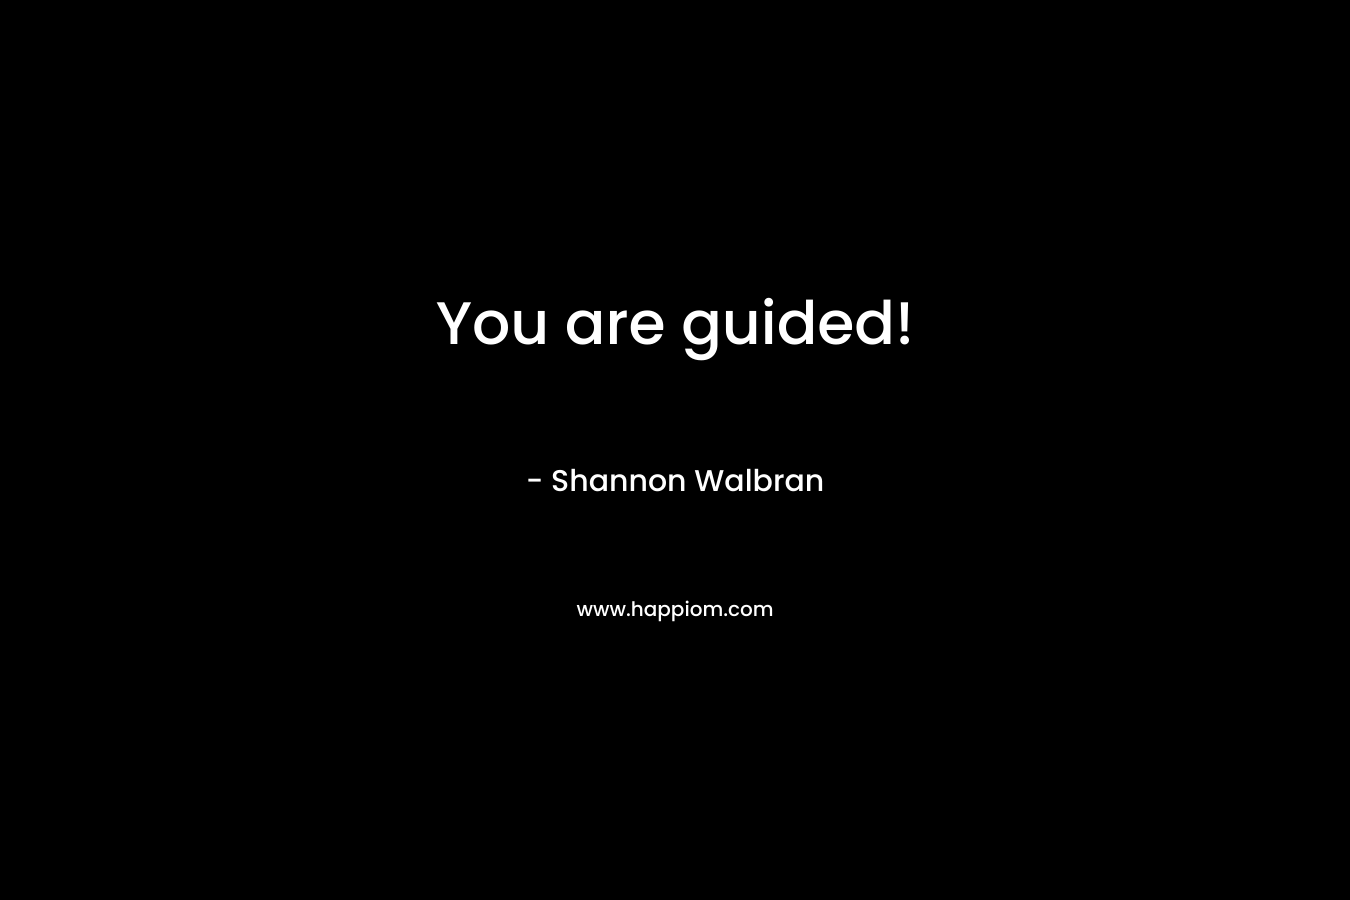 You are guided!